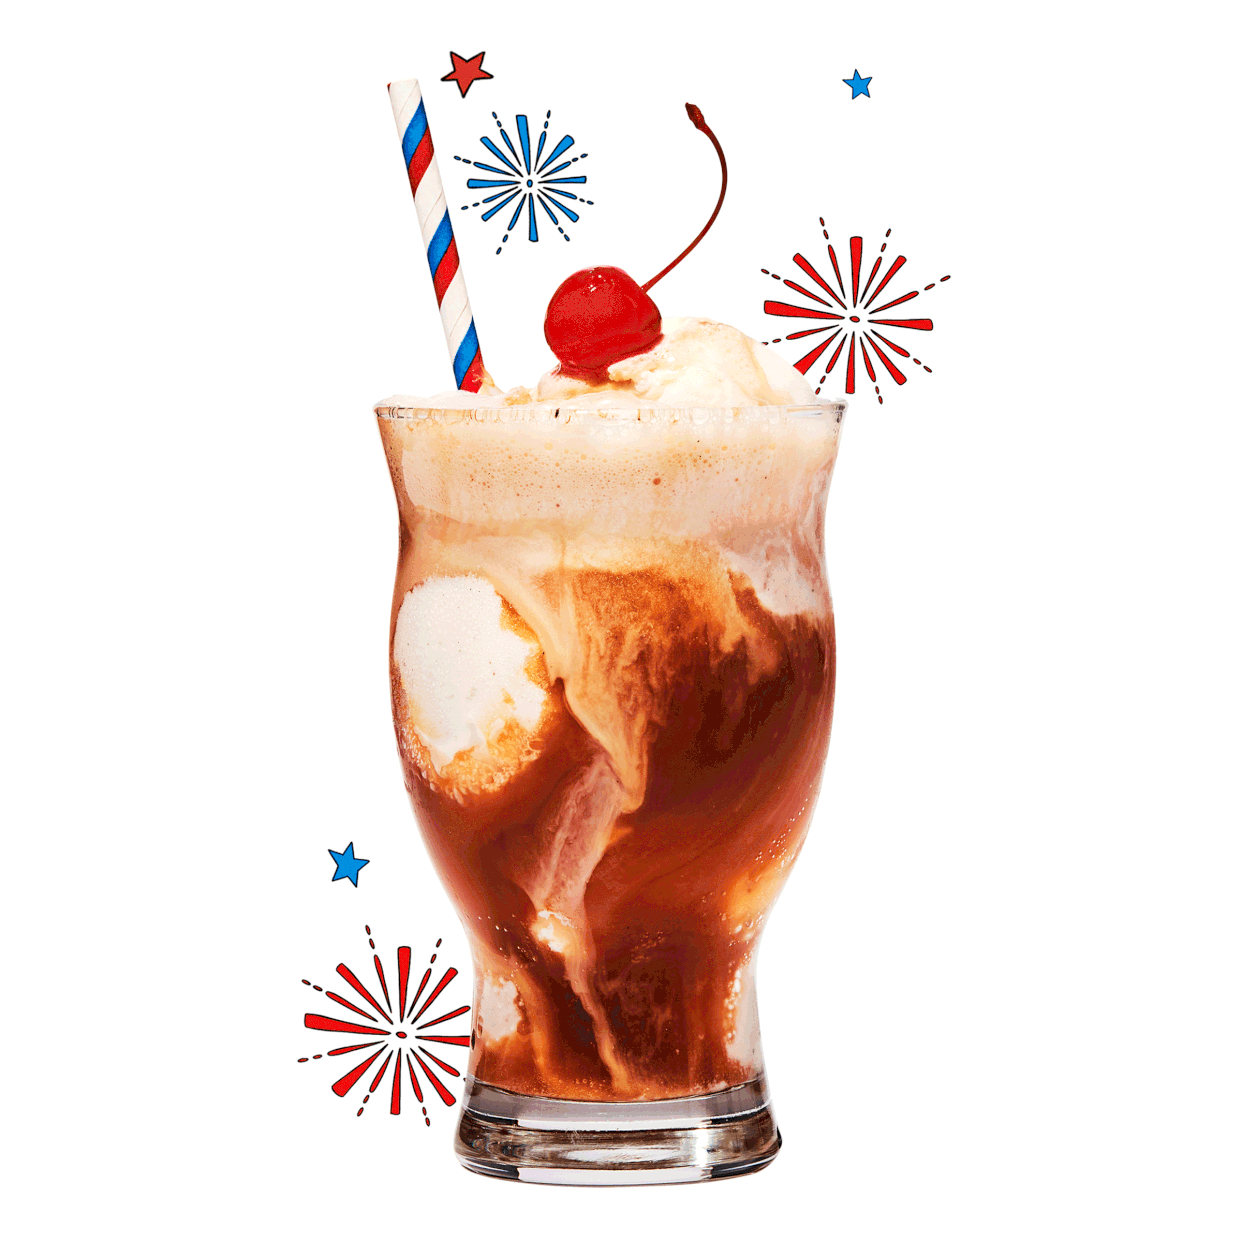 Root beer float with firework and star illustrations bursting in the background